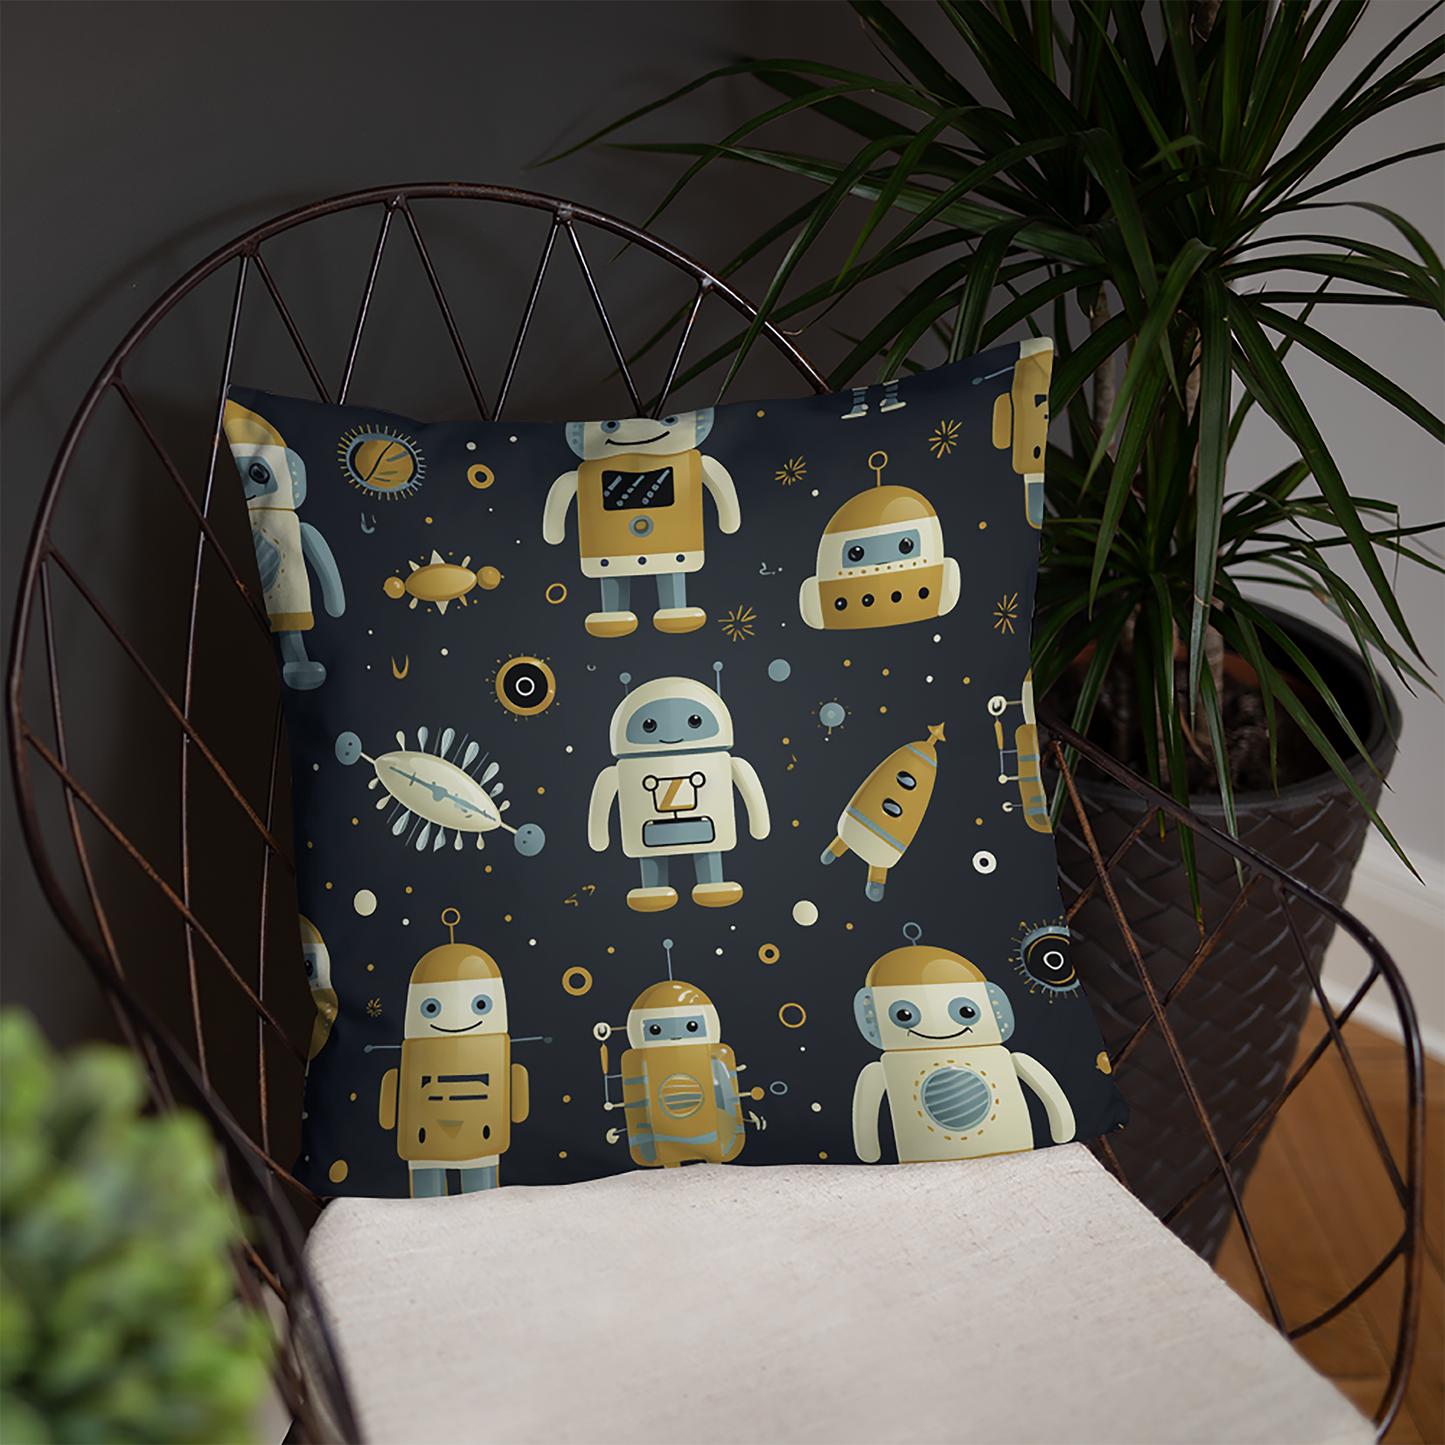 Future Throw Pillow Kinetic Spaceship and Robots Polyester Decorative Cushion 18x18